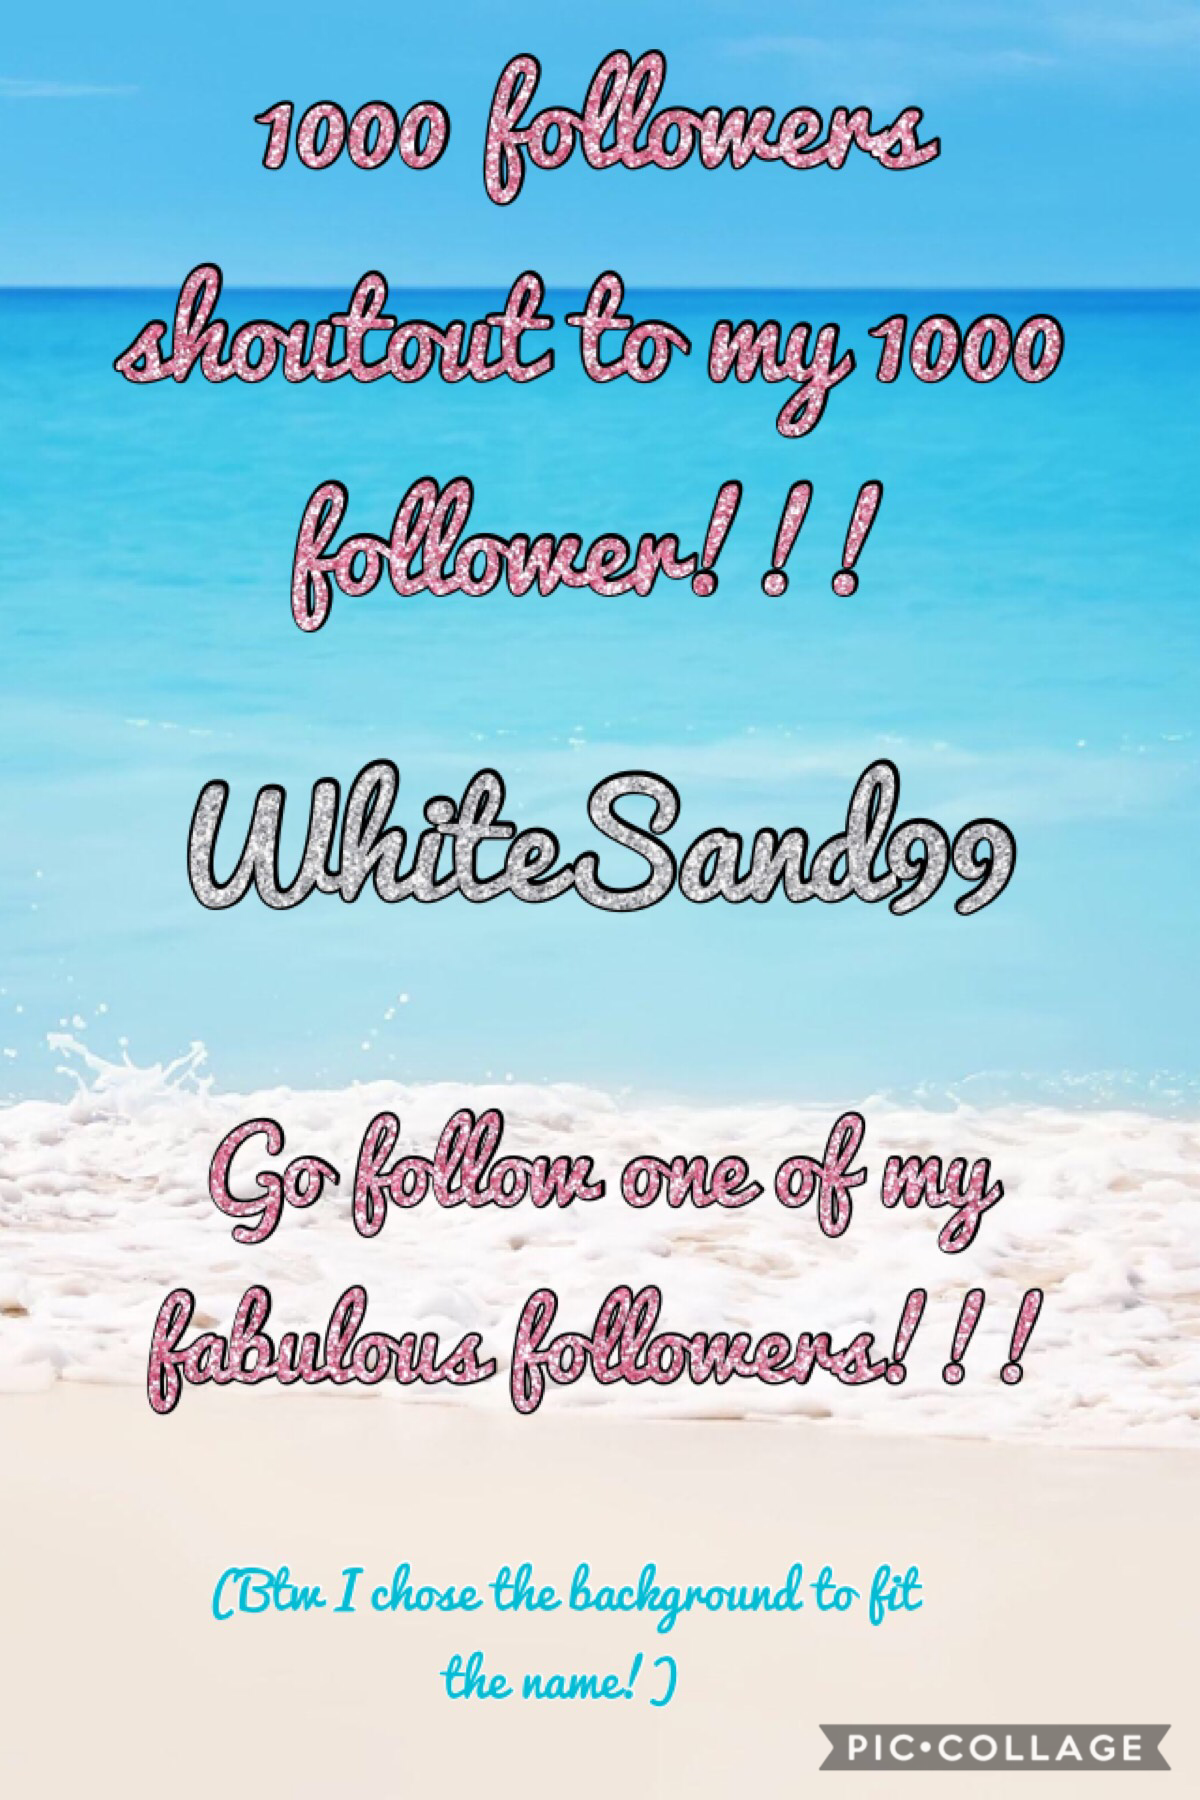 OHHHHH MYYYY GOOOOOOD!!!!
1000 followers!!???!!! I never thought I’d get this far! One minute I’m on 13 followers the next I’m on 1000! Thanks so much to everyone and go follow WhiteSand99! X